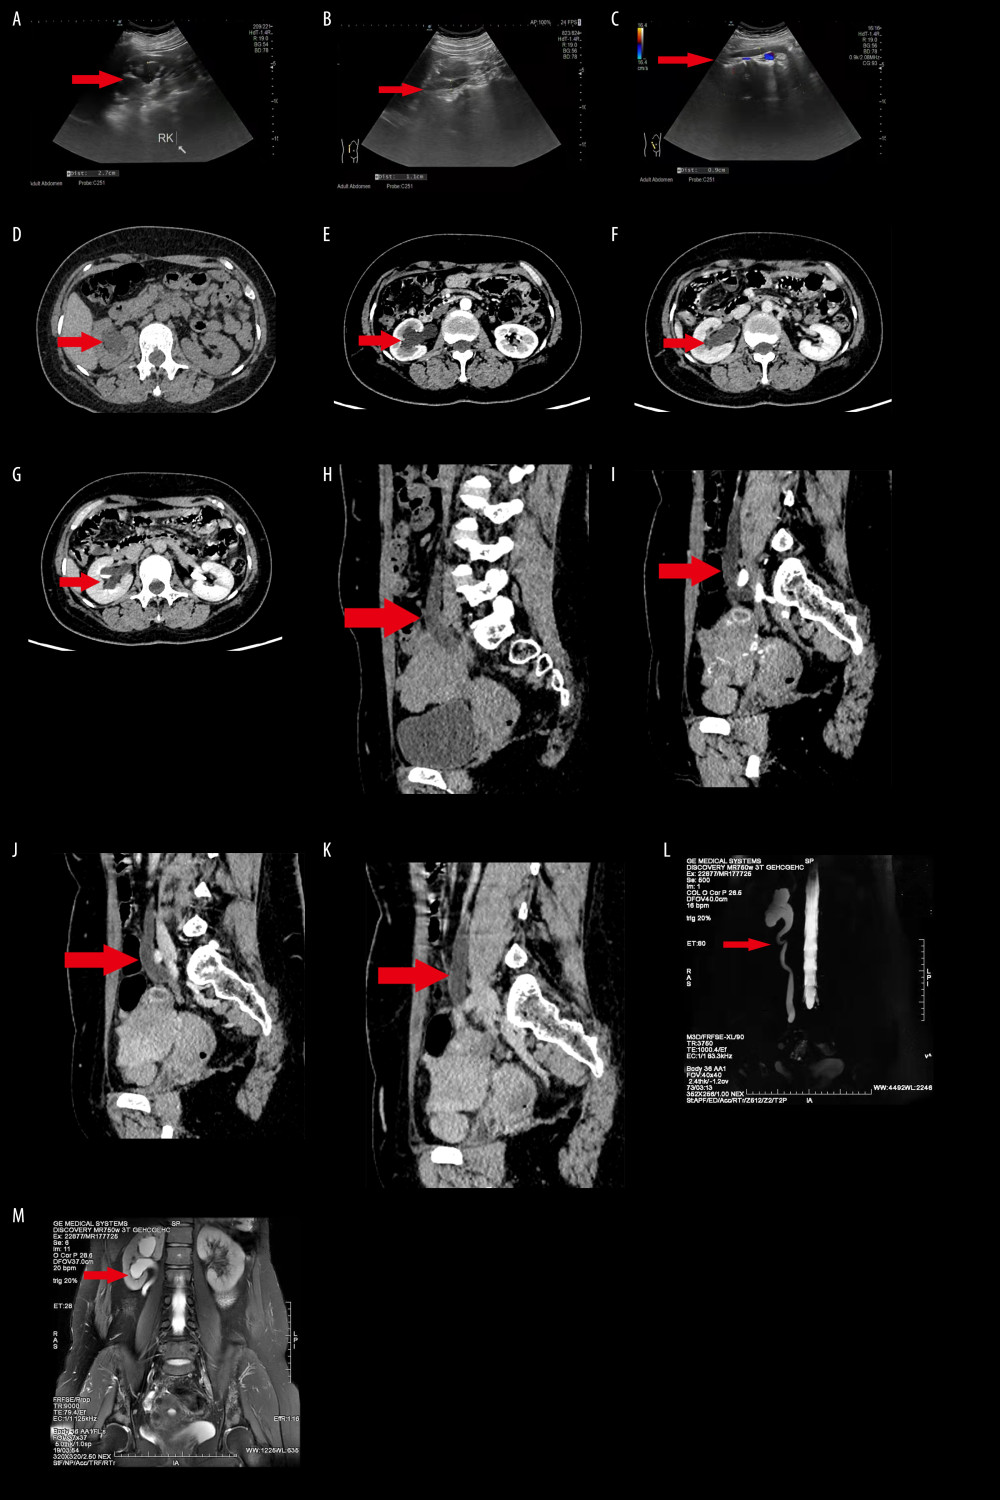 Patient imaging data. A–C): Color ultrasound of the urinary system. (A) The arrow indicates right hydronephrosis; (B, C) Arrows point to right ureteral dilatation. D–K): CT and contrast-enhanced CT. (D) CT transverse section, the arrow points to the right hydronephrosis; (E–G) Enhanced CT transverse section arterial phase, venous phase, and delayed phase, and the arrow points to the right hydronephrosis; (H) CT median sagittal (I–K) Arterial phase, venous phase, and delayed phase in the mid-sagittal enhanced CT images, arrows point to the dilation of the right lower ureter. L, M): MRI of the urinary tract. (L) The arrow points to the ureteral stenosis, and hydronephrosis and ureteral dilatation in the lower segment of the stenosis can be seen; (M) The arrow points to hydronephrosis.